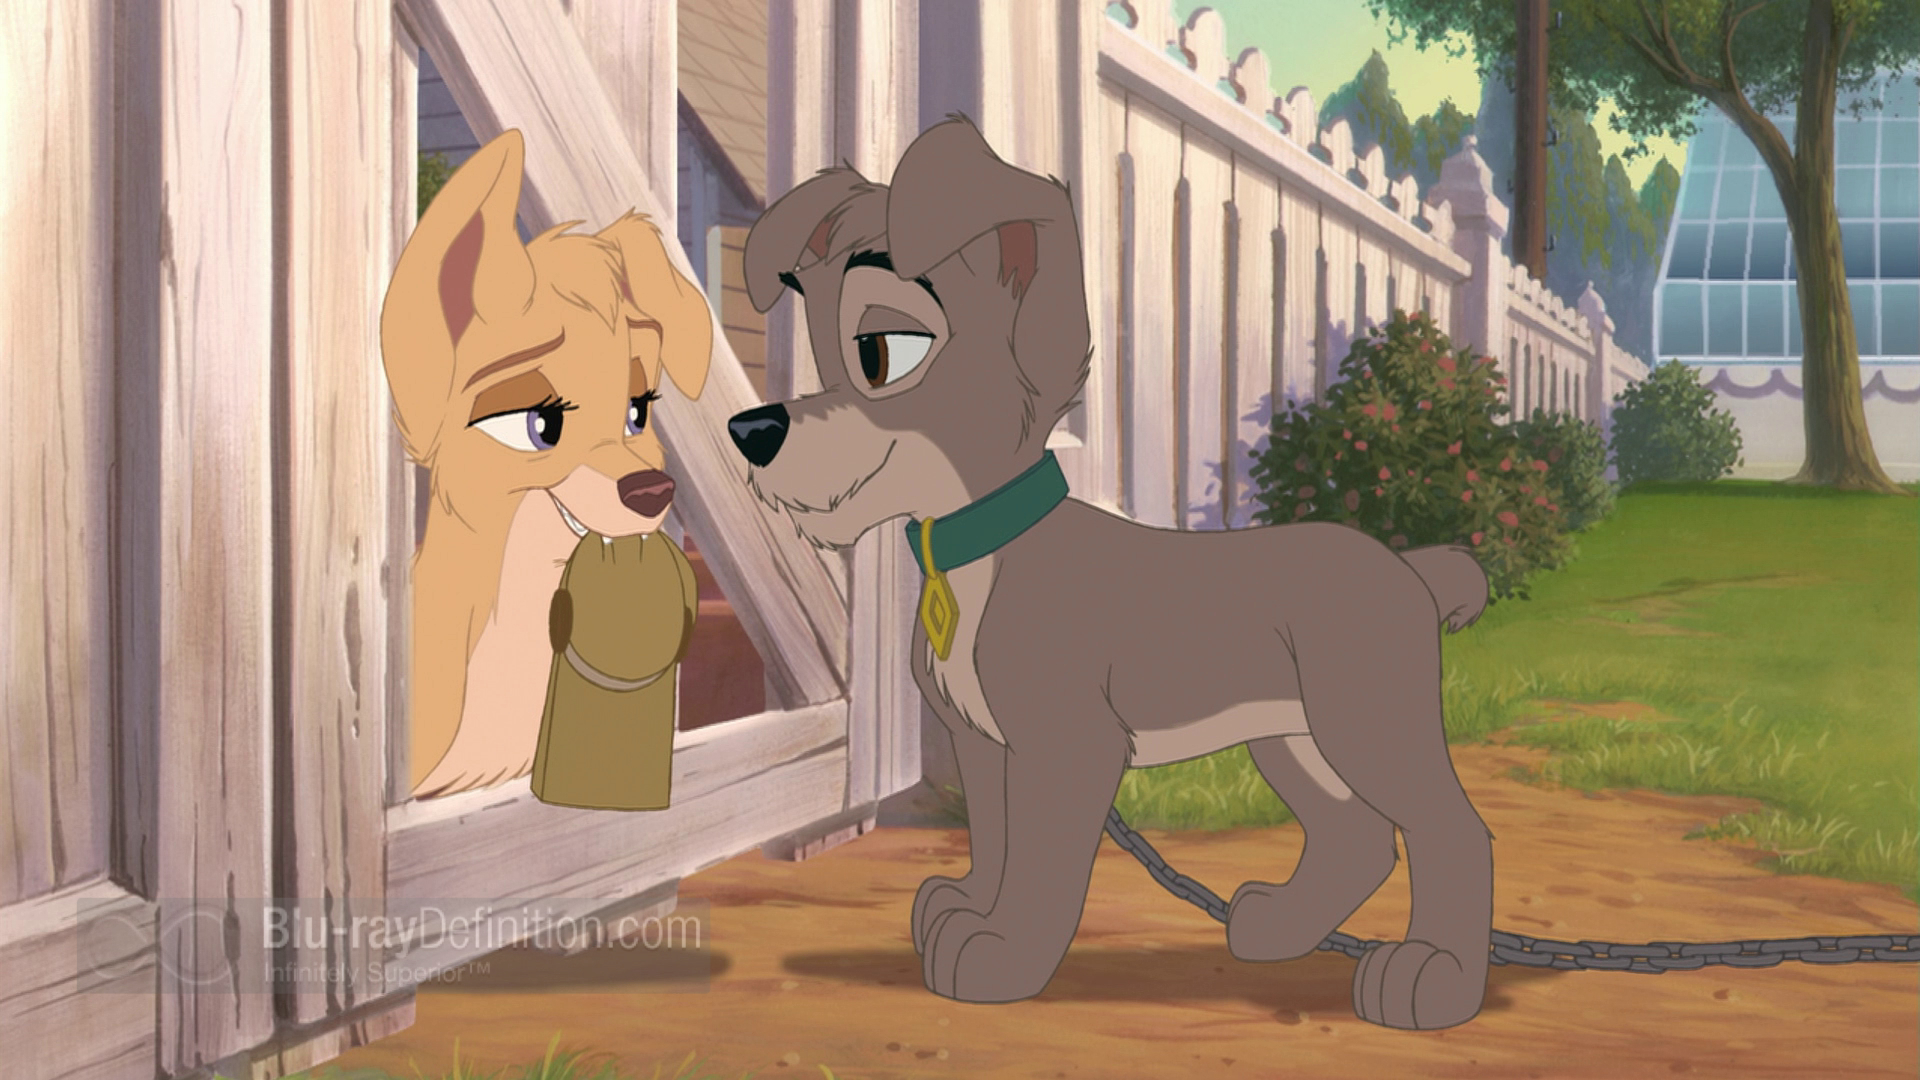 Lady And The Tramp II: Scamp's Adventure wallpaper, Movie, HQ Lady And The Tramp II: Scamp's Adventure pictureK Wallpaper 2019